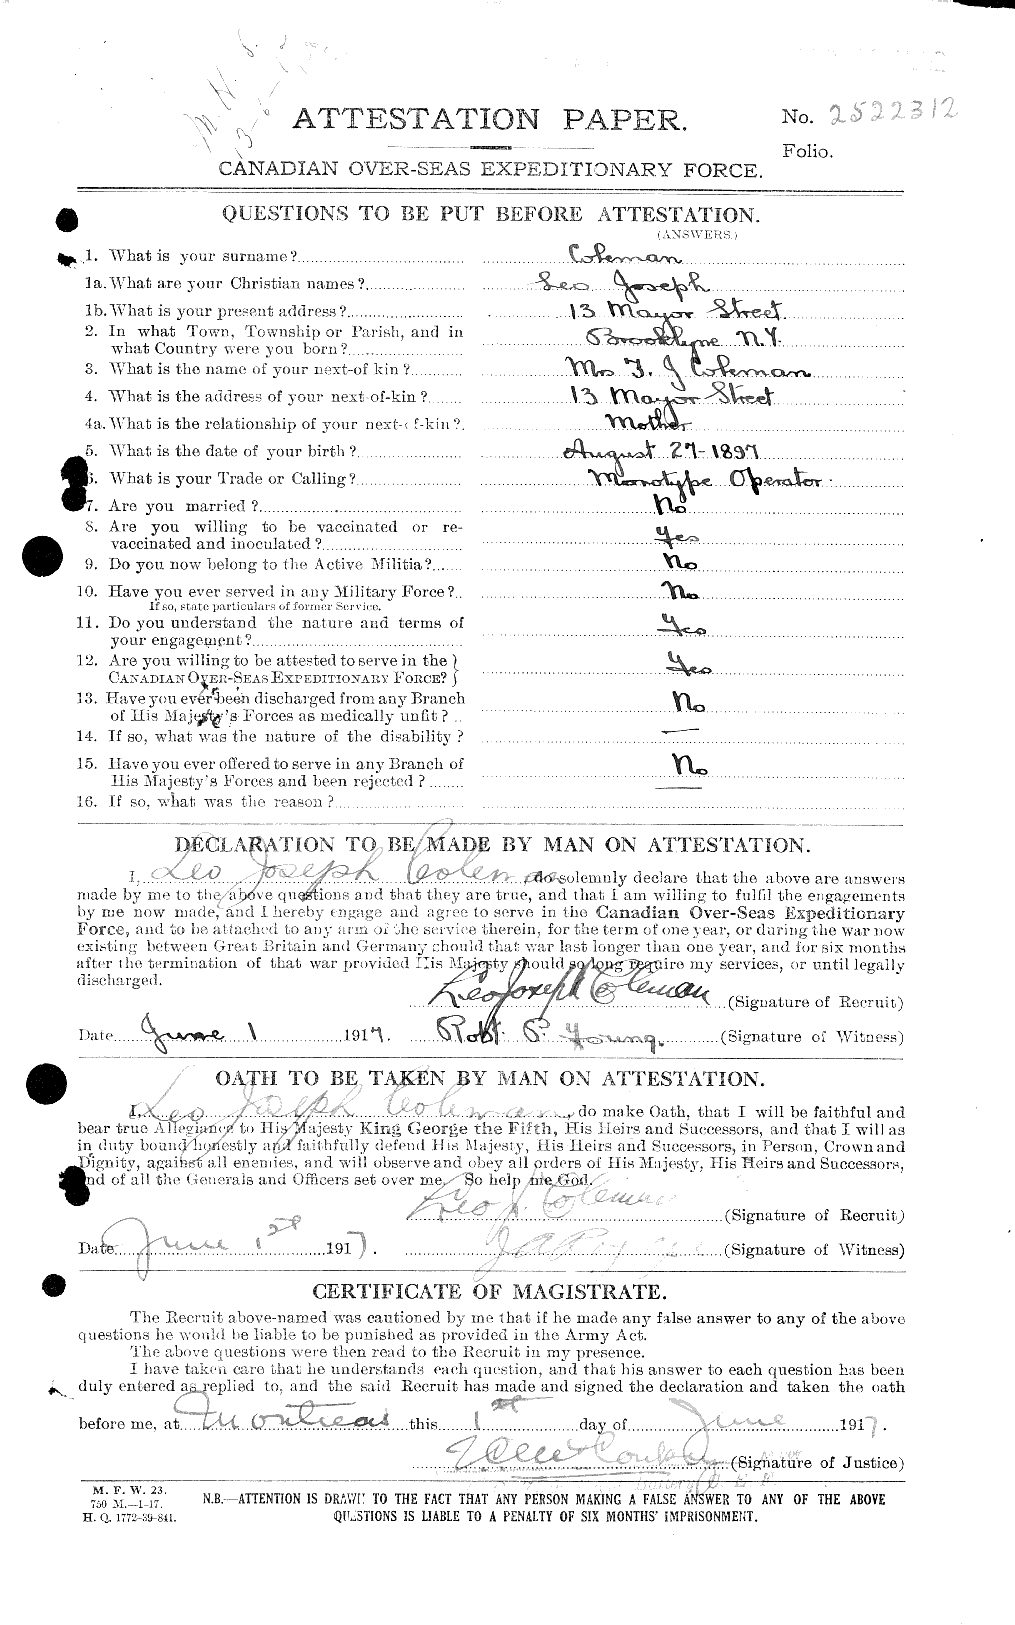 Personnel Records of the First World War - CEF 028229a